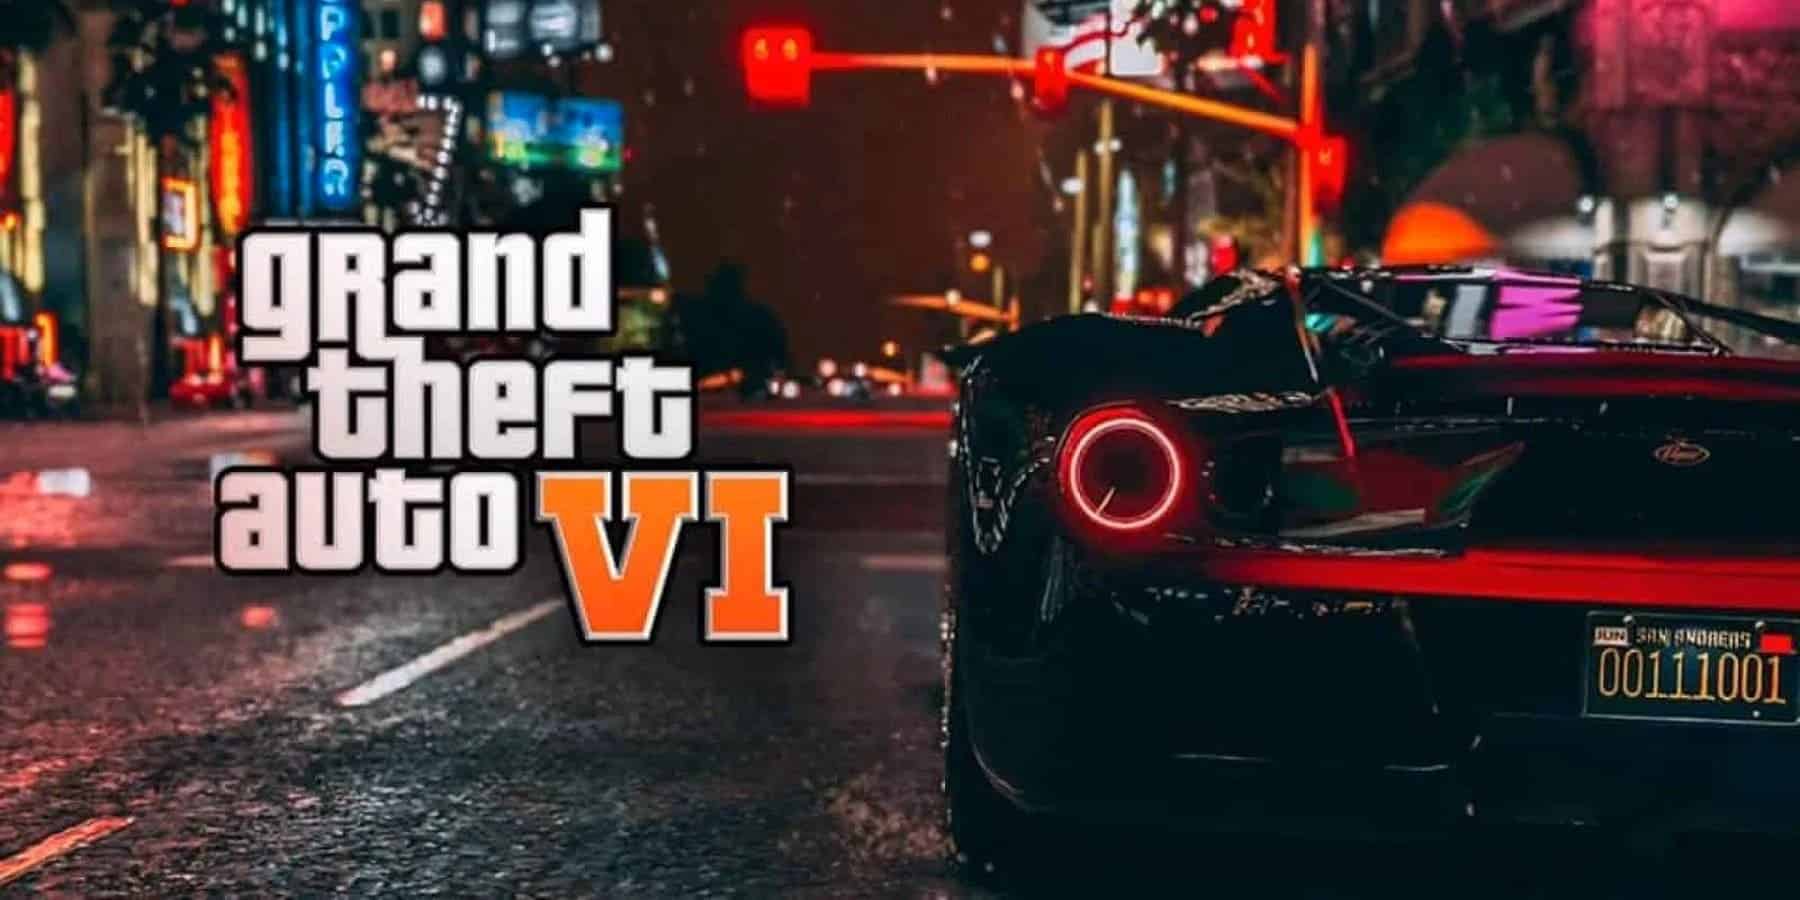 GTA 6' release date, possible setting, protagonists and latest news